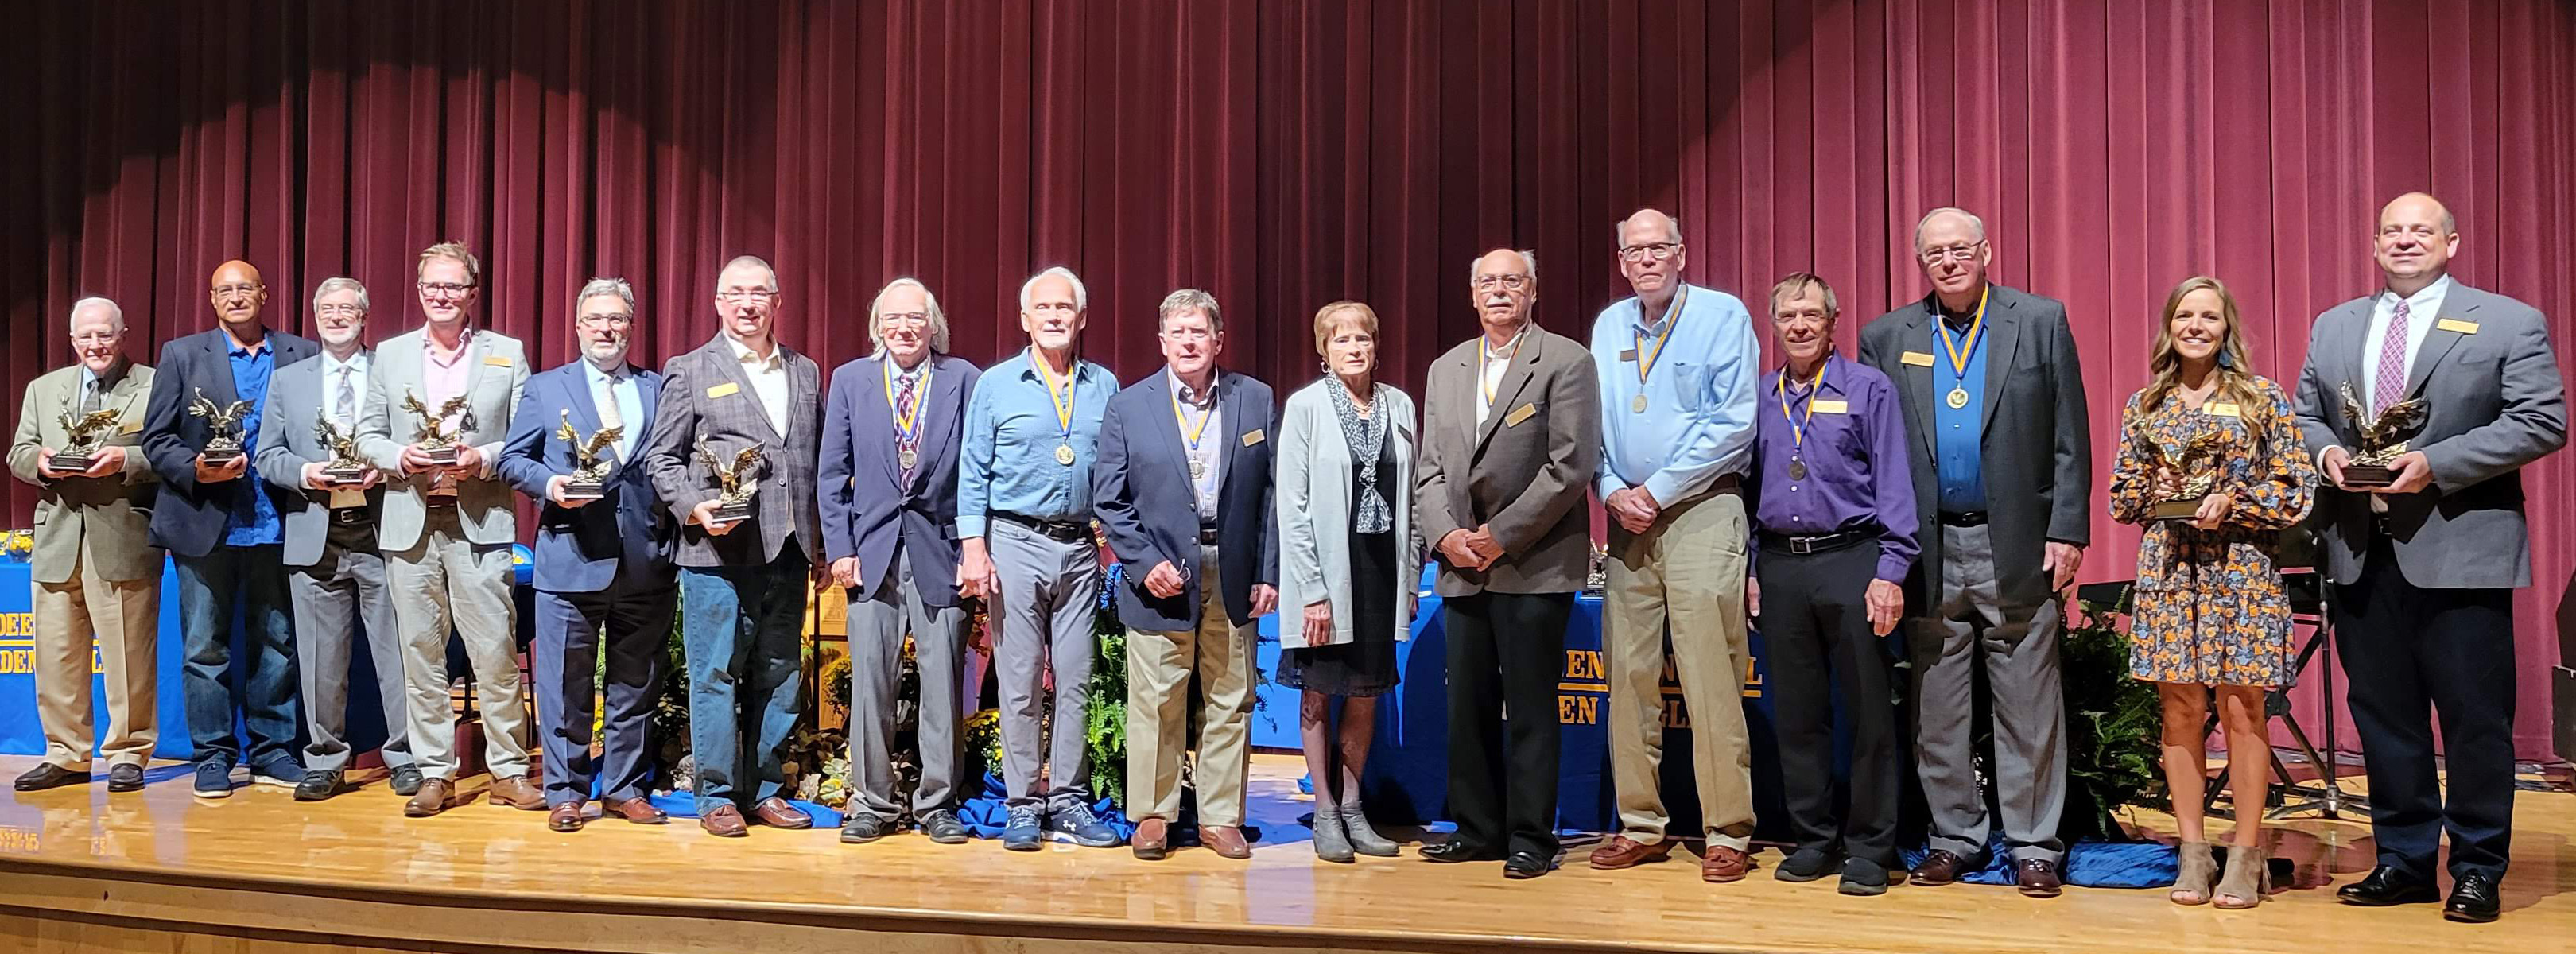 2021 Aberdeen Central Hall of Fame inductees